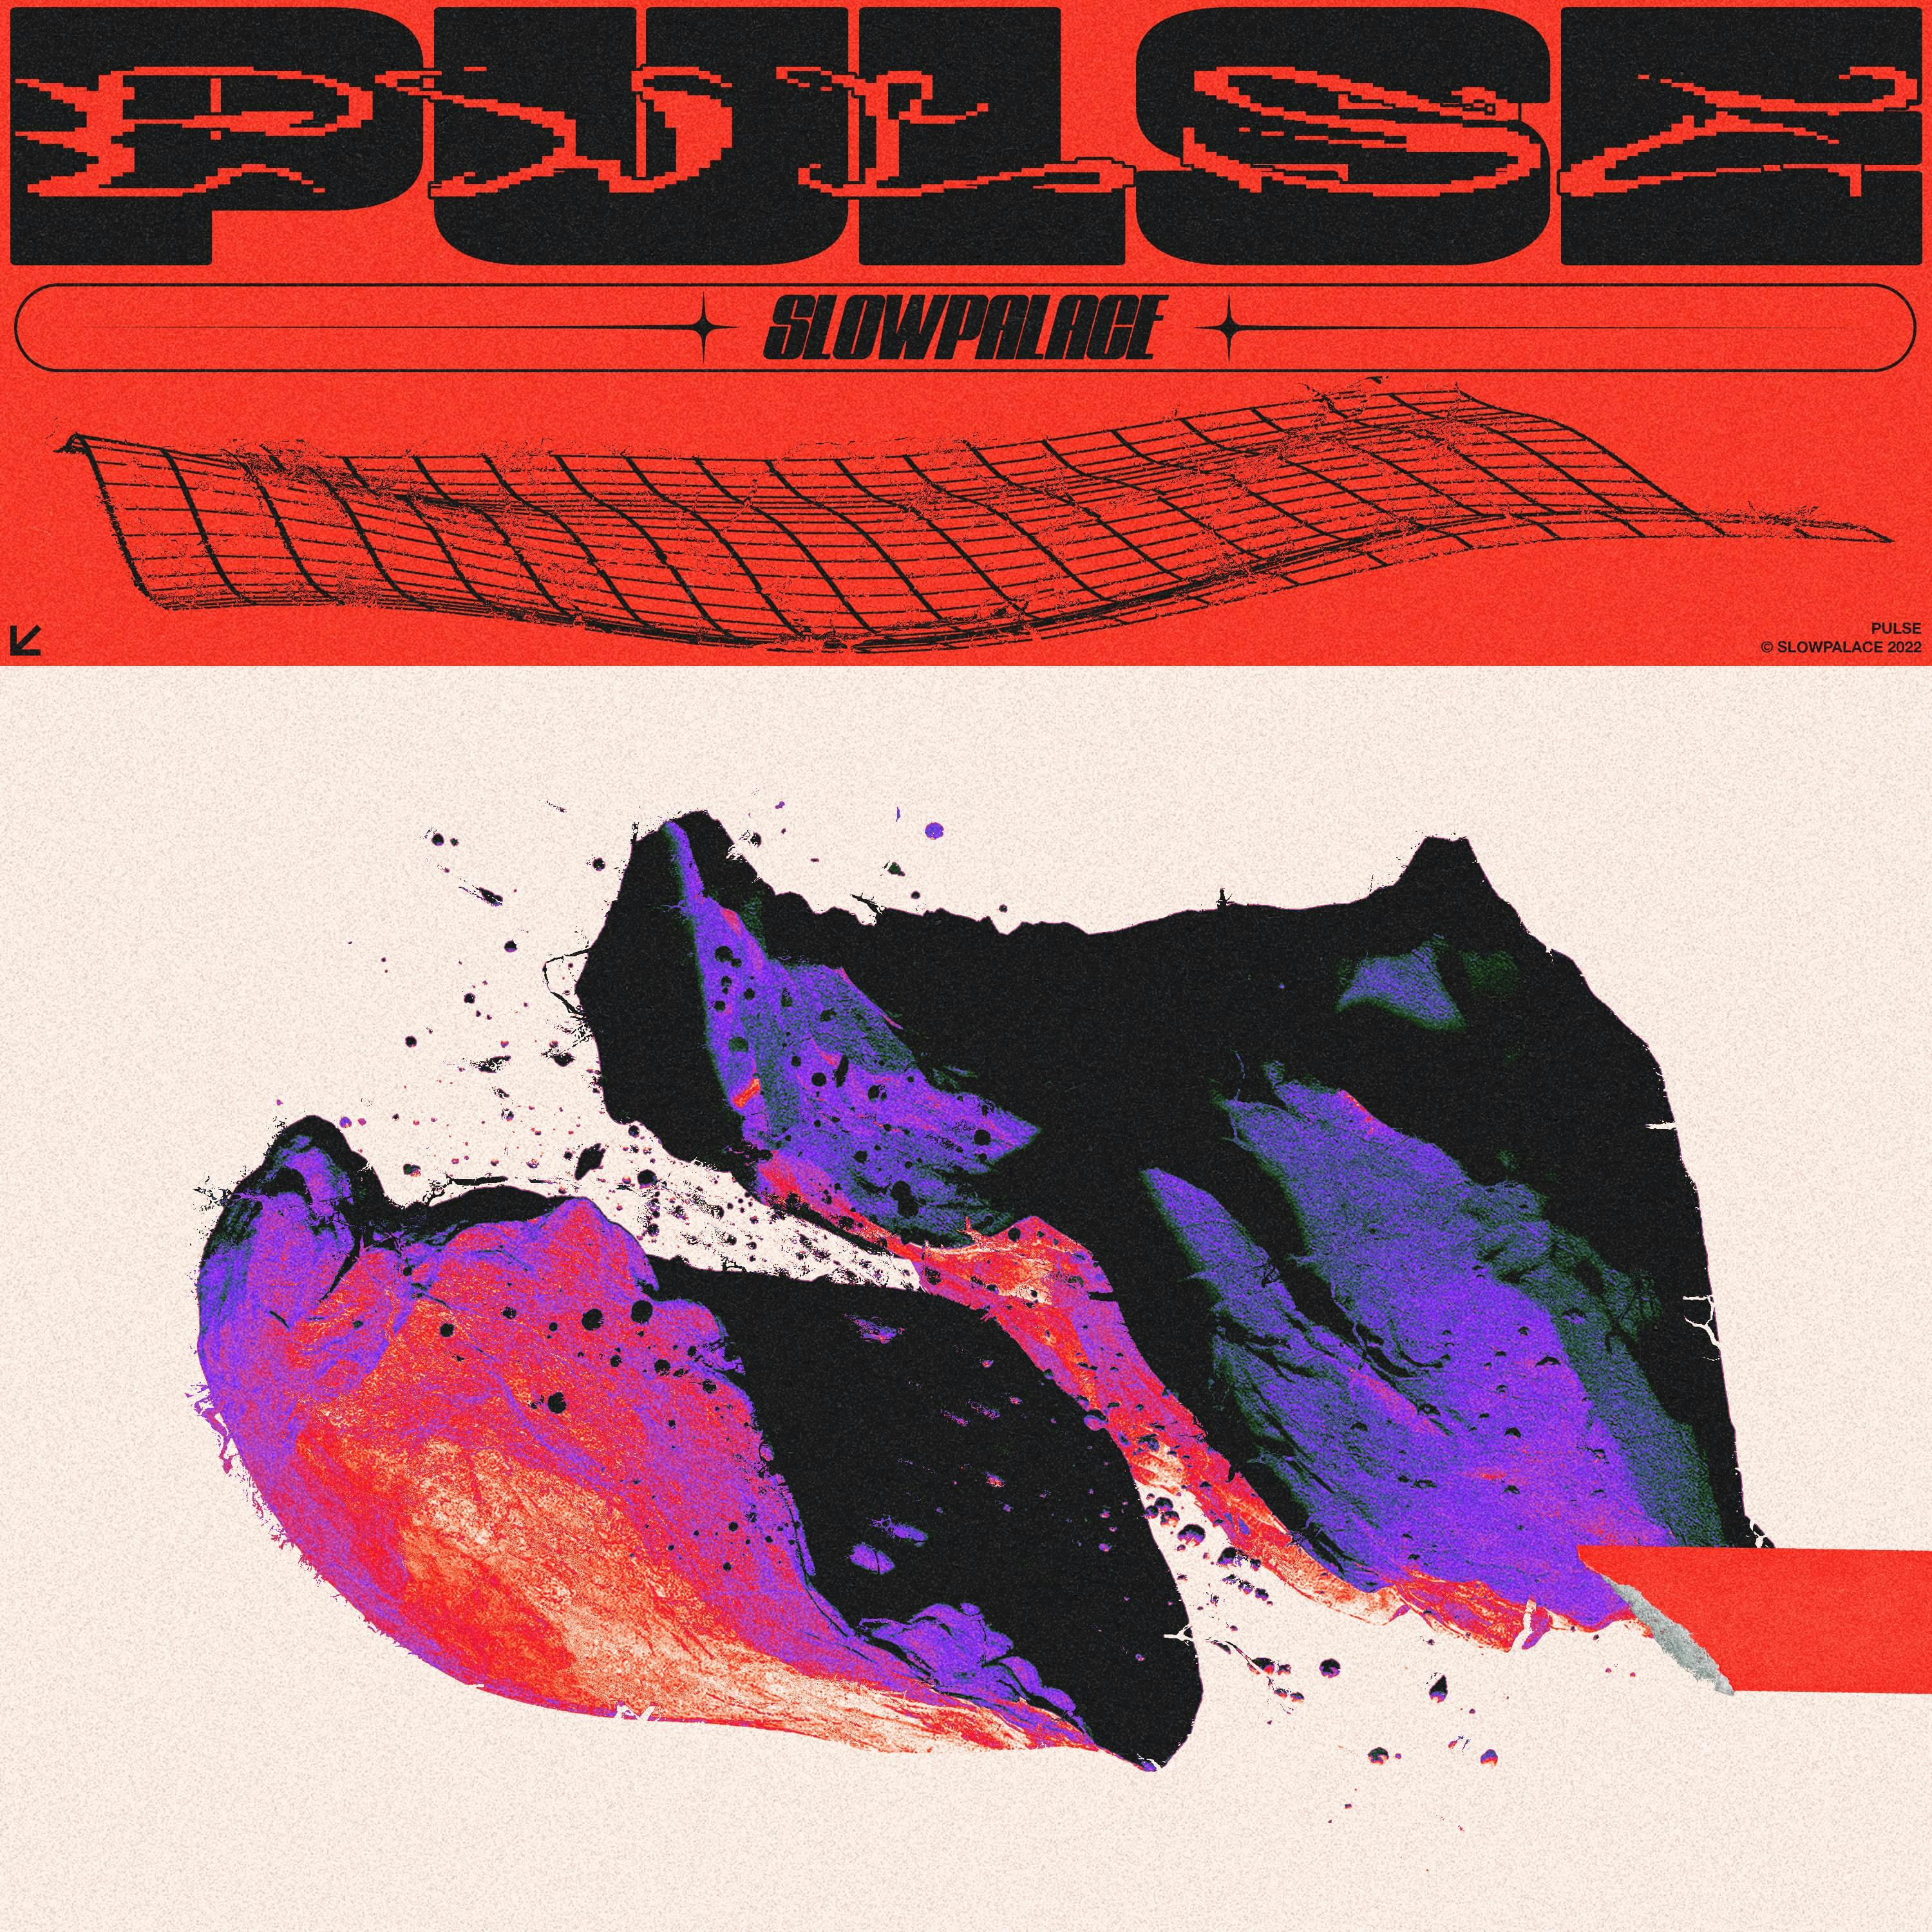 Cover art for PULSE by Slowpalace